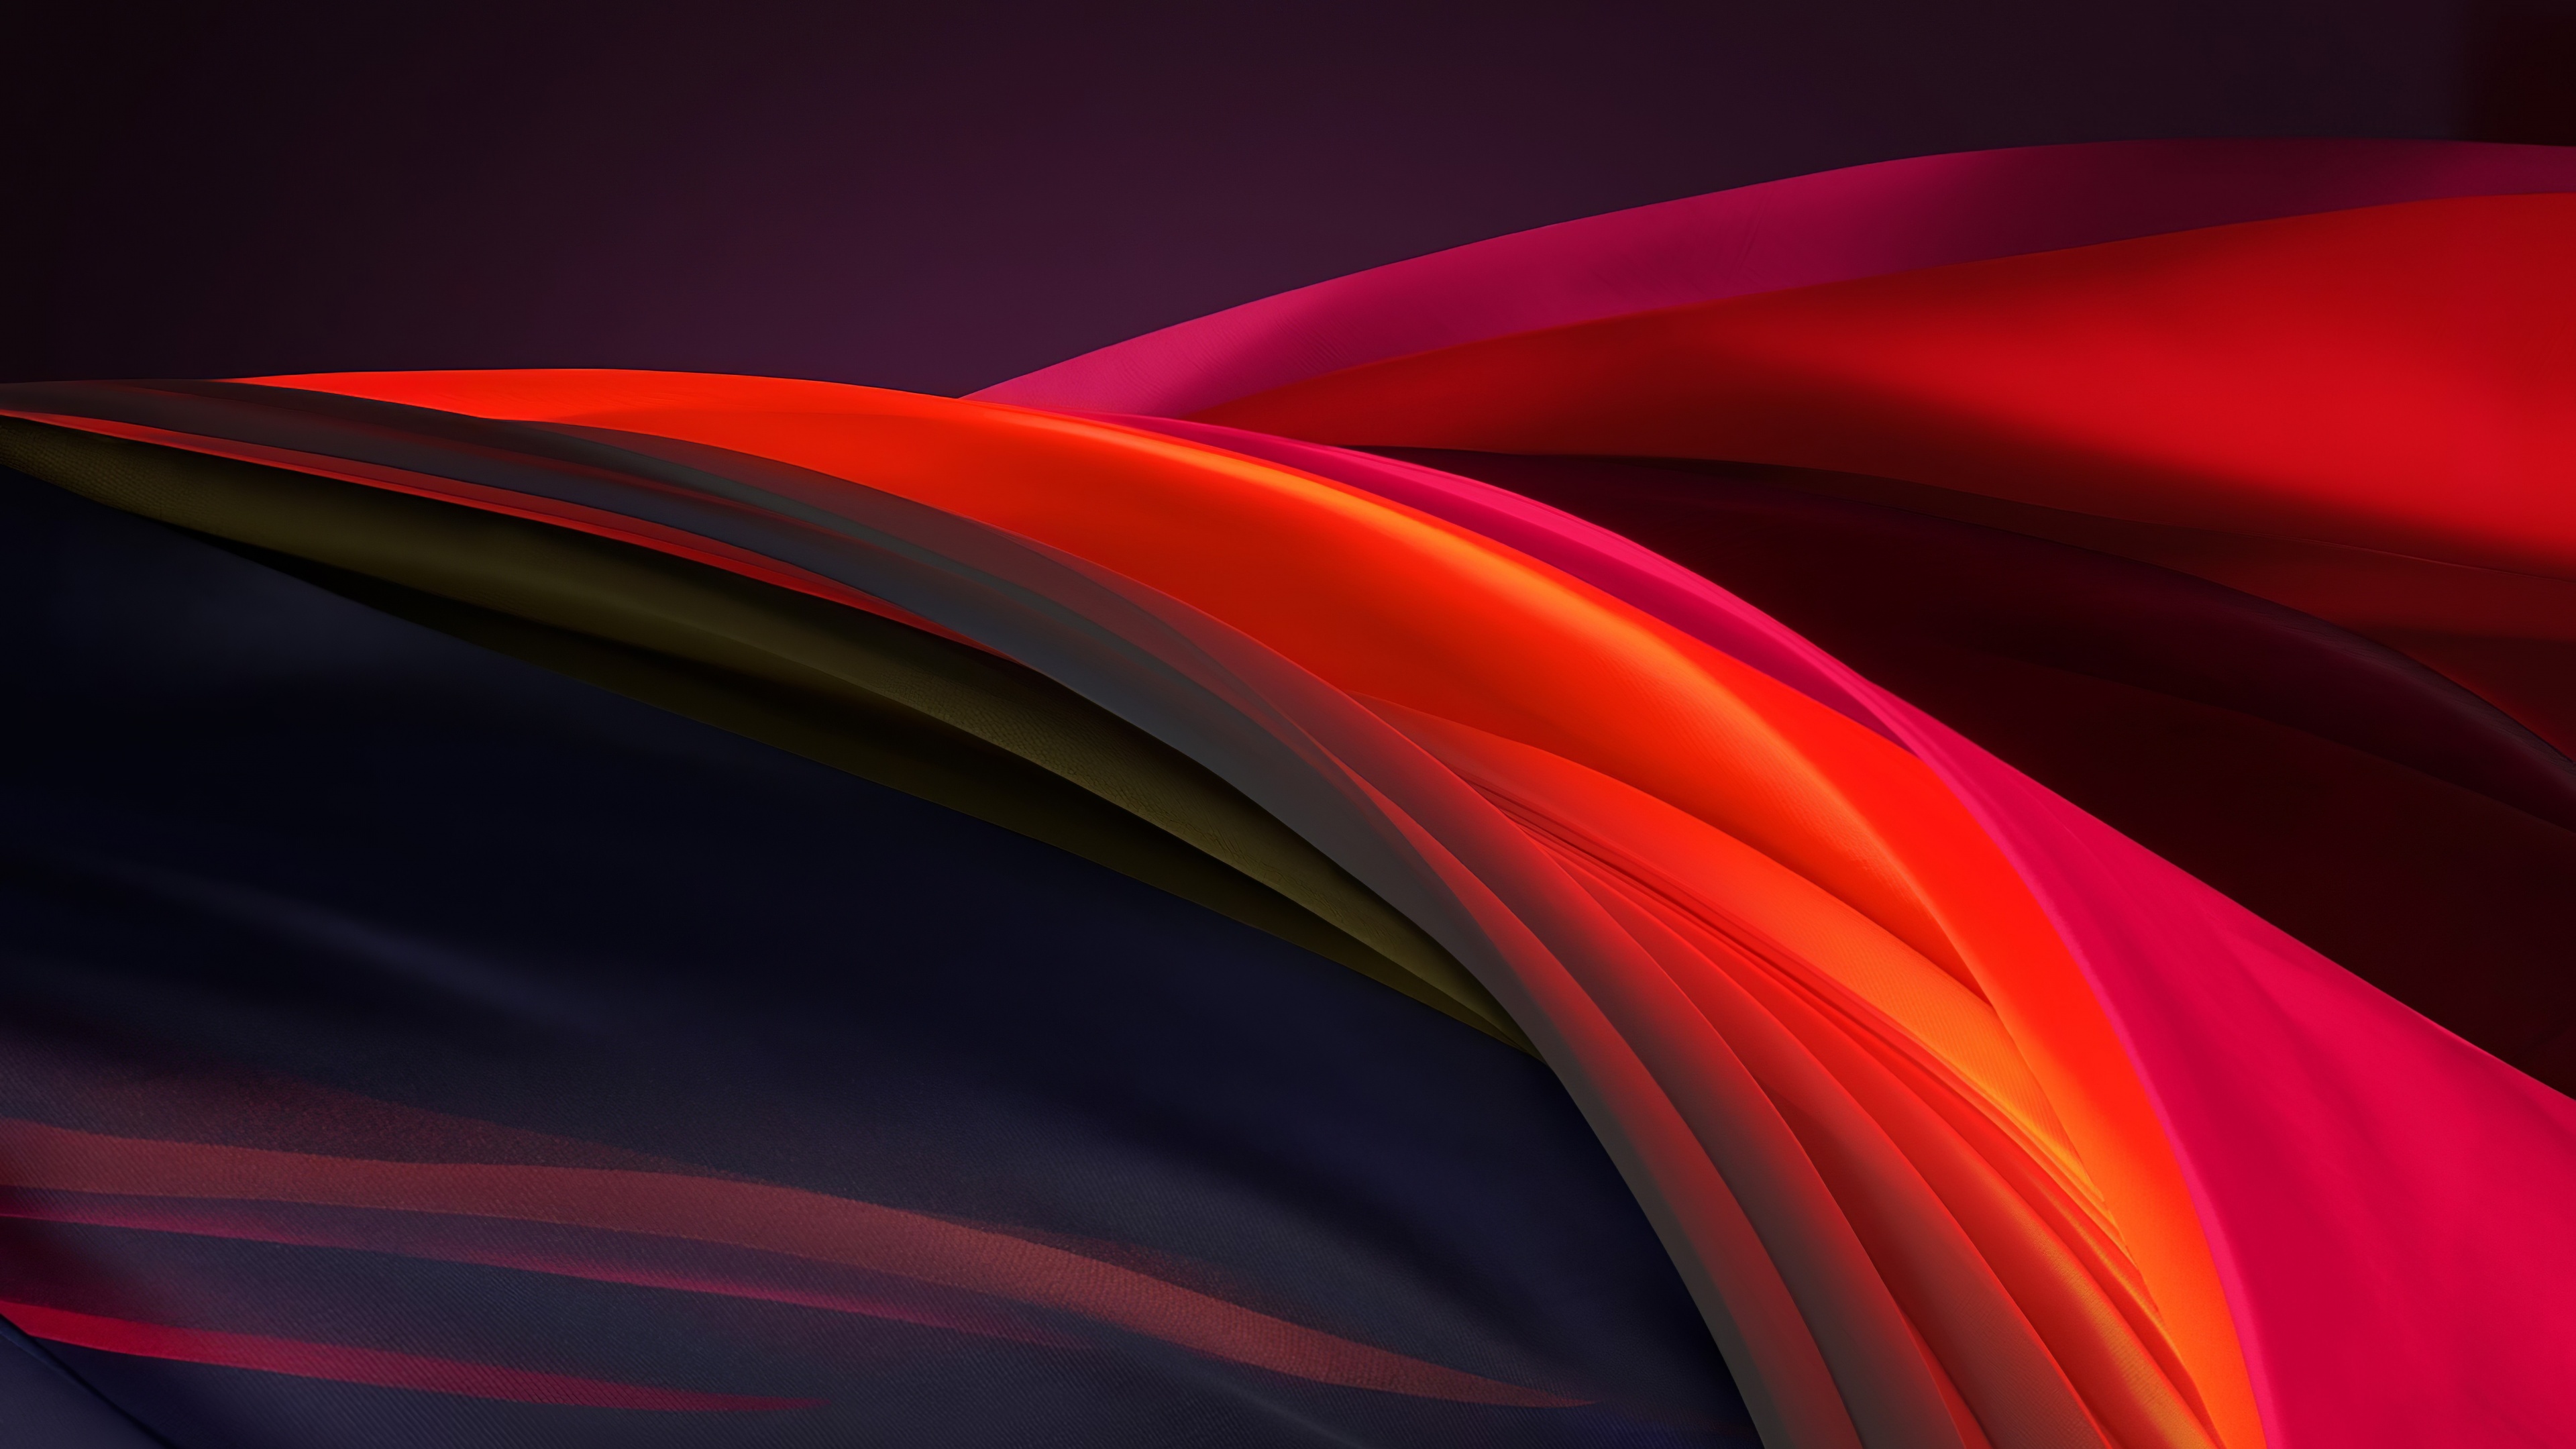 Abstract Curved Red Texture 3840x2160